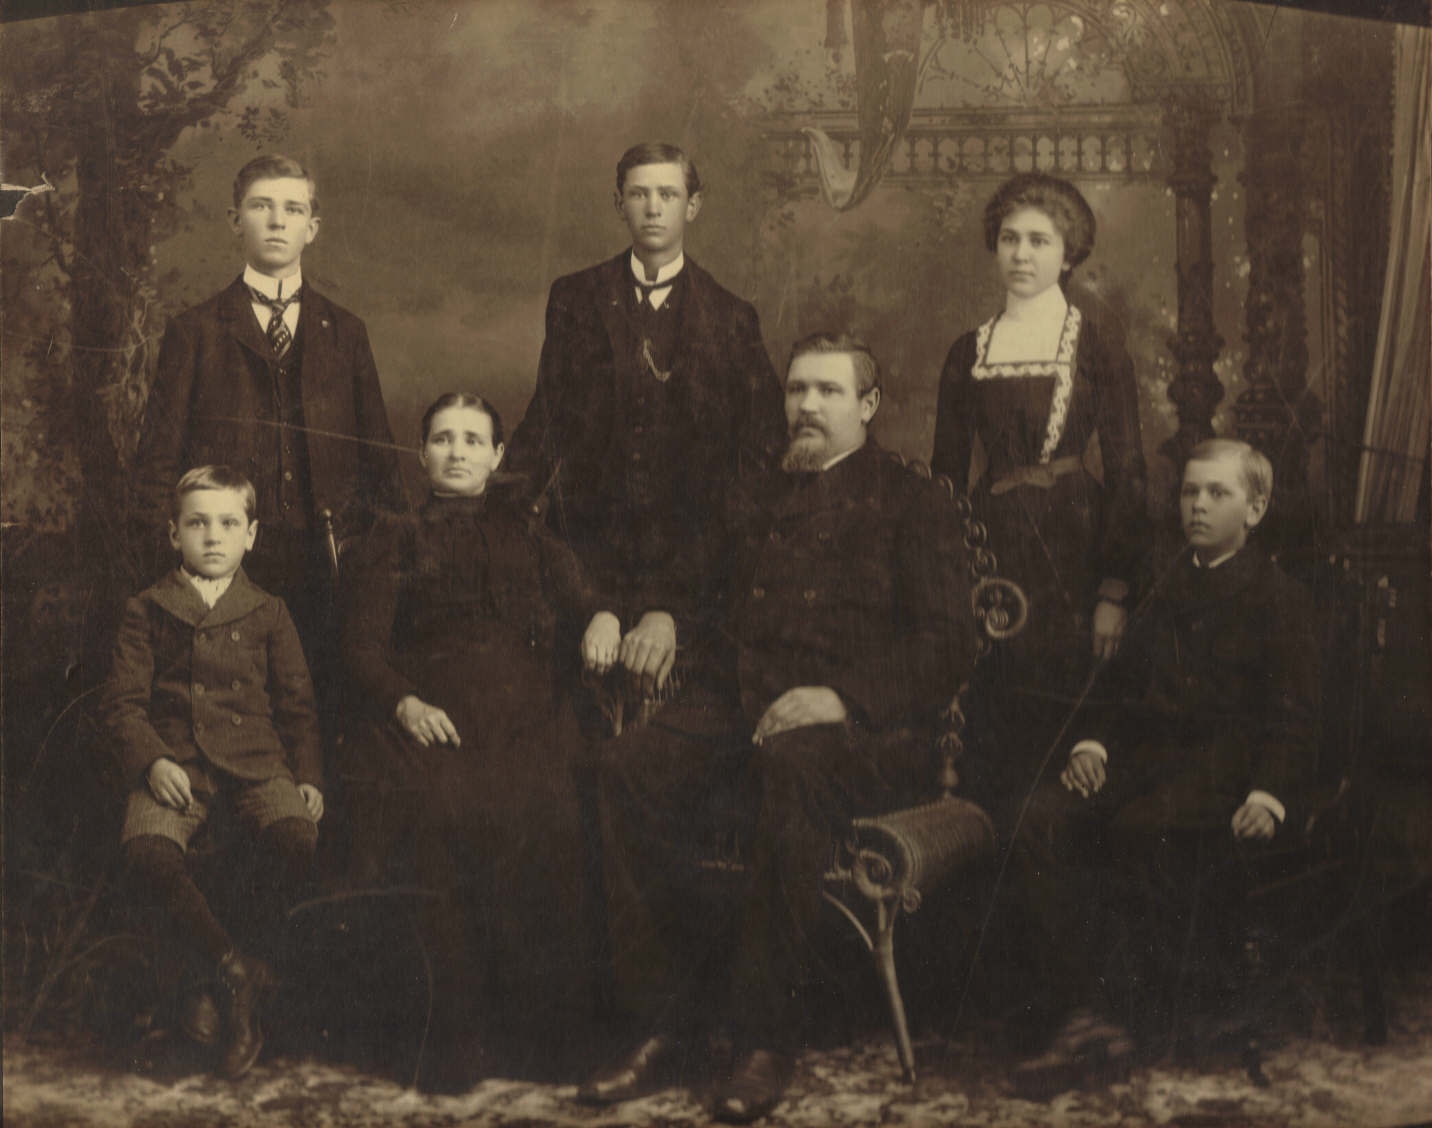 Robards family portrait 1908